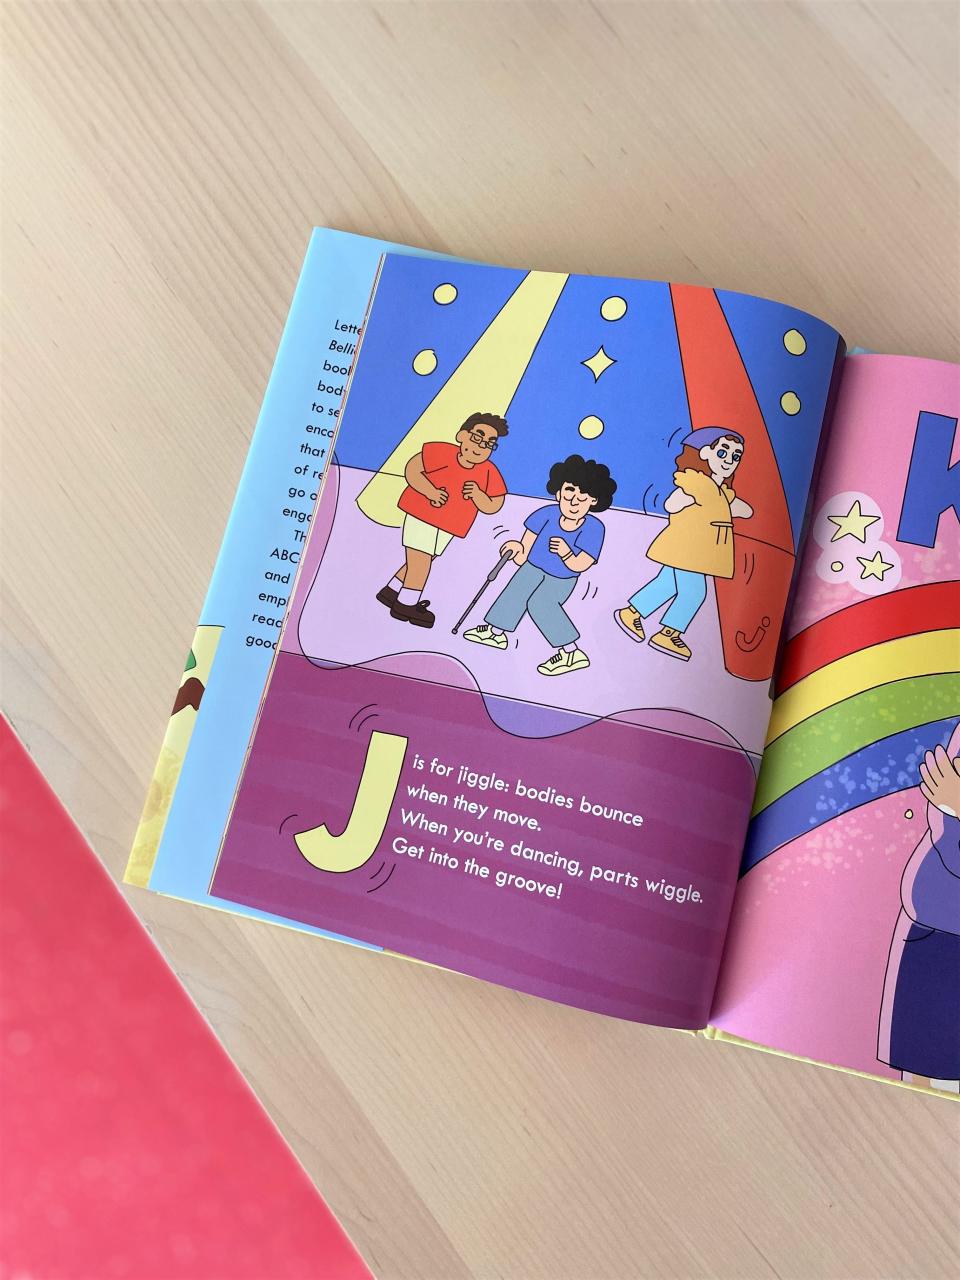 Photo from above of a page in the book, "B is For Bellies." The page shows three people dancing under a yellow and red spotlight and reads, "J is for jiggle; bodies bounce when they move. When you're dancing, parts wiggle. Get into the groove!" 